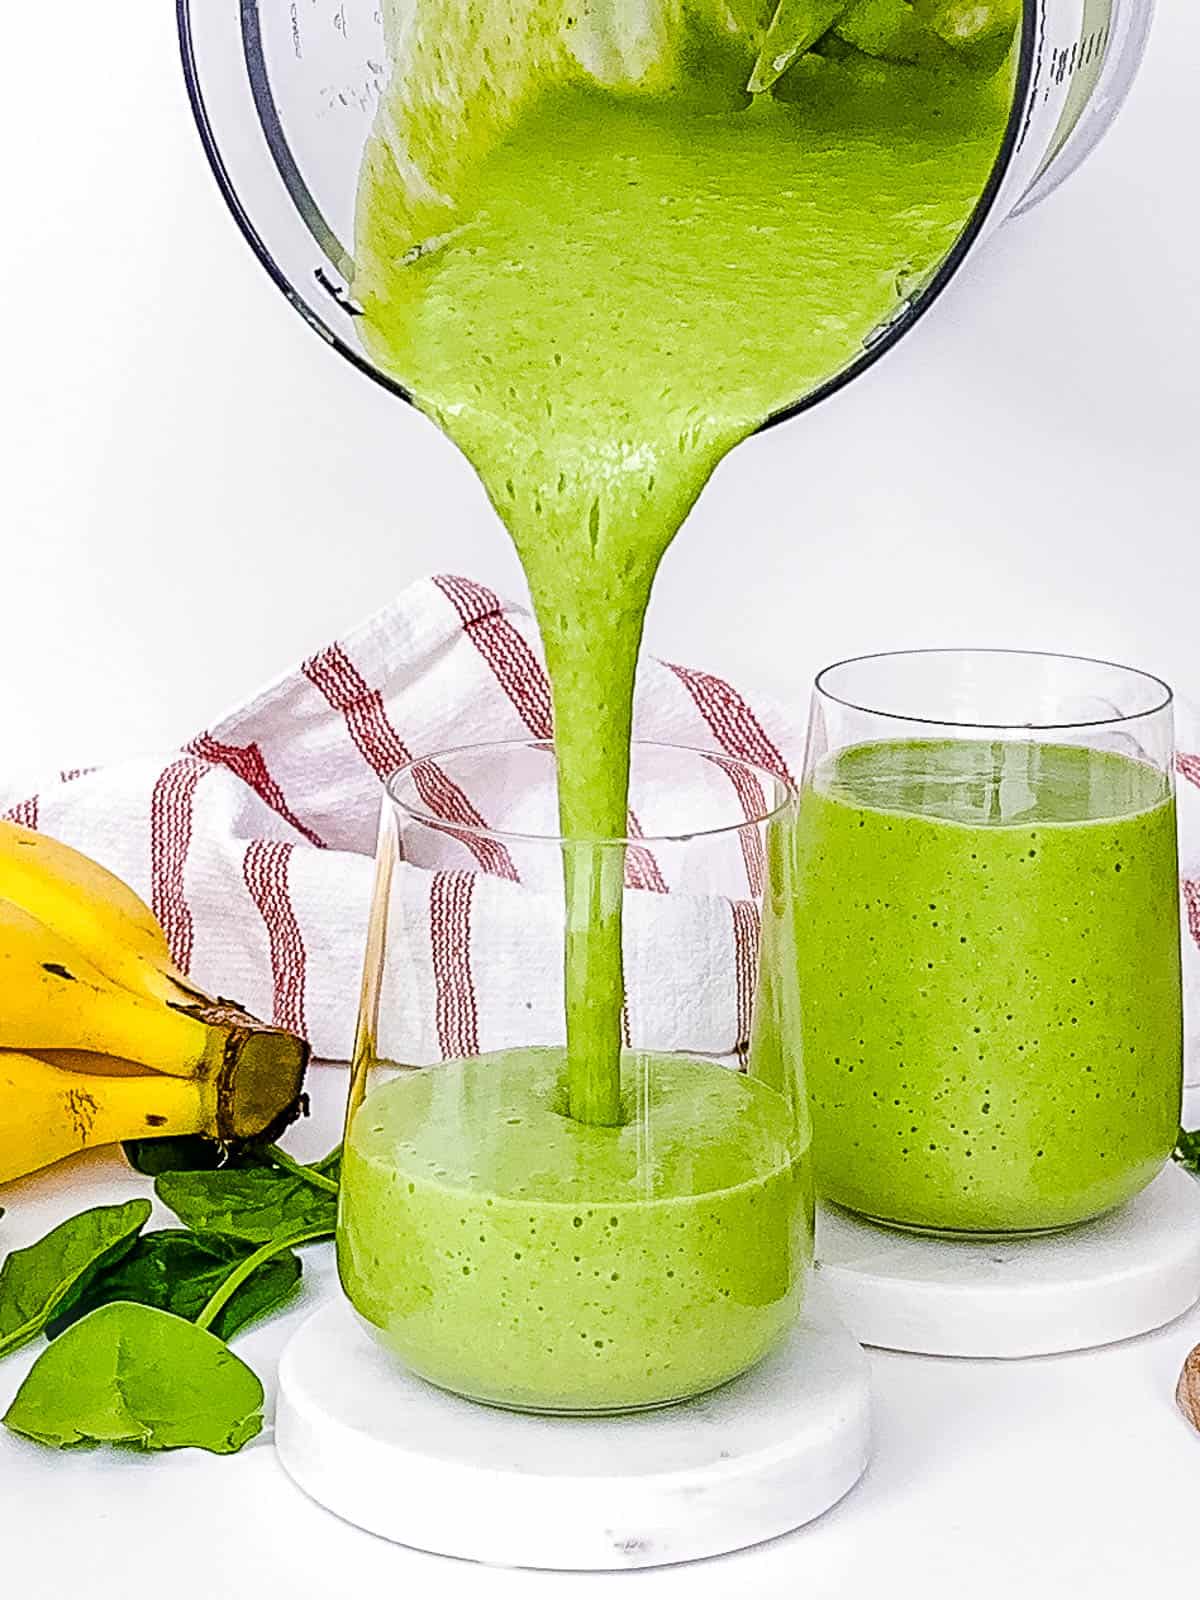 Cucumber smoothie being poured into glasses on a countertop.